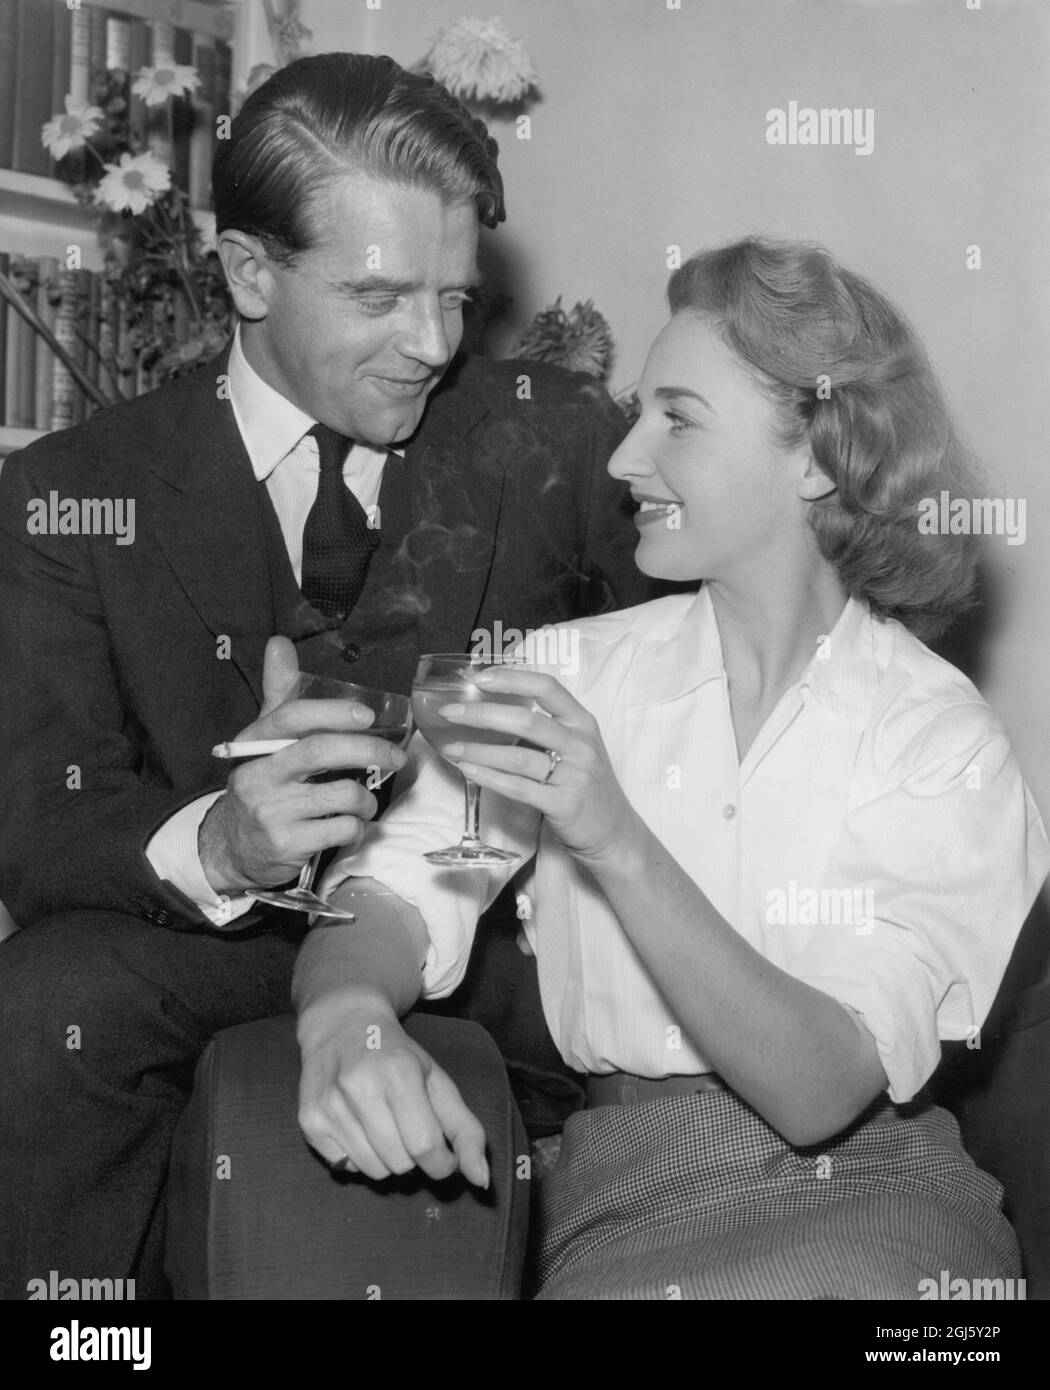 Chris Chataway , TV personality and former Olympic athlete , clinks glasses in a toast with his fiancée , Miss Anna Lett in London . 30th December 1958 Stock Photo